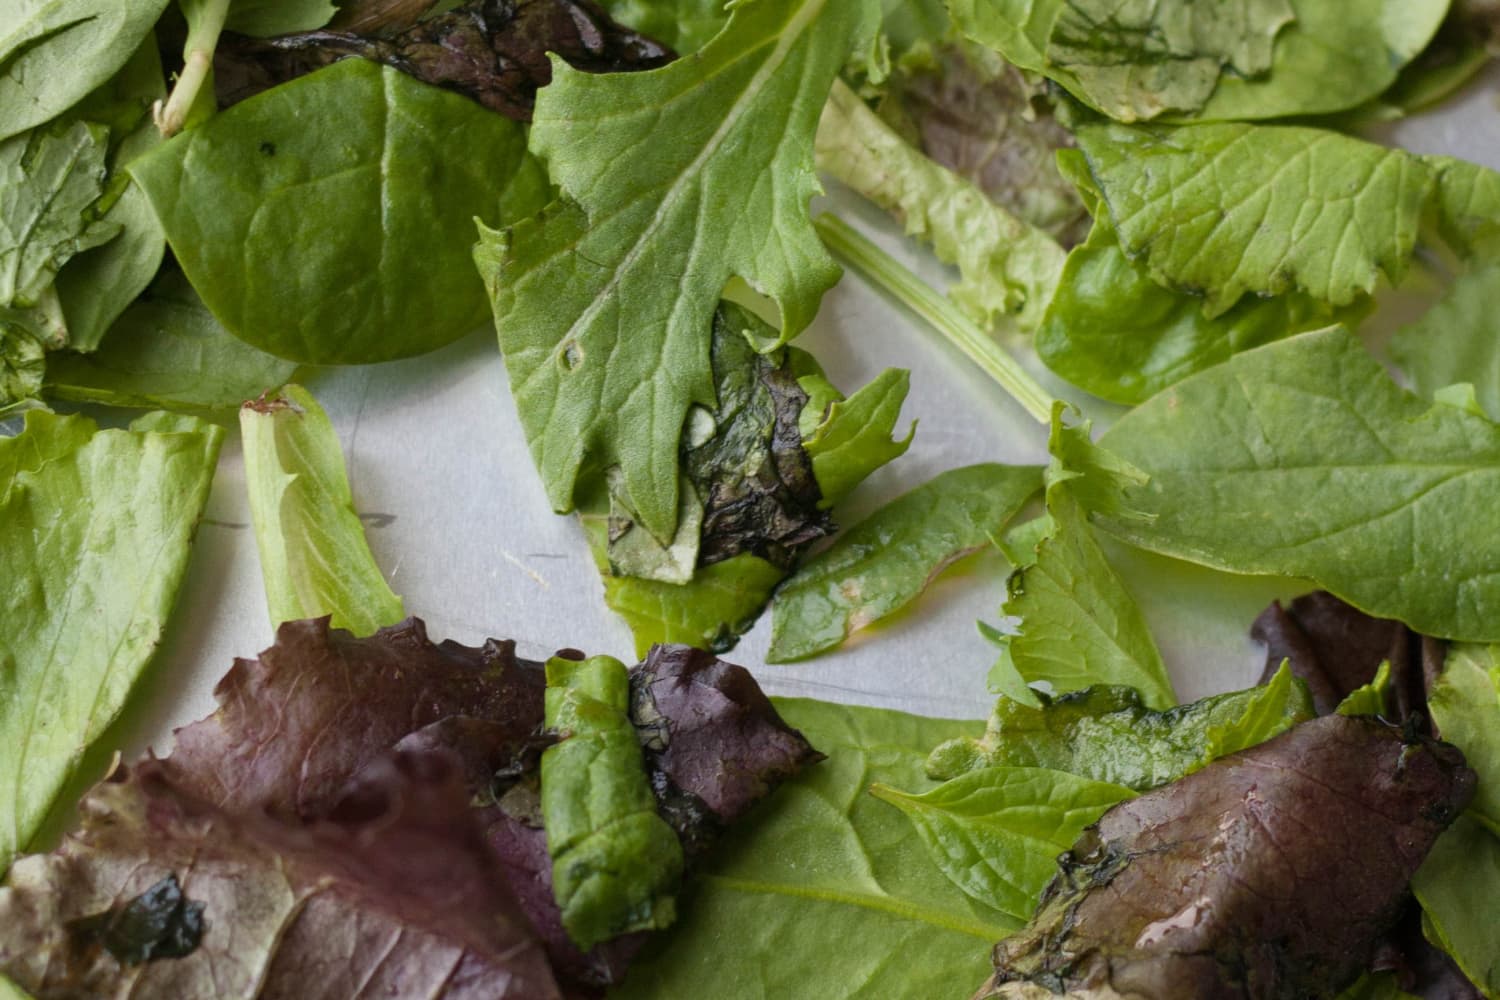 Keep Your Greens Fresh: A Simple Storage Solution